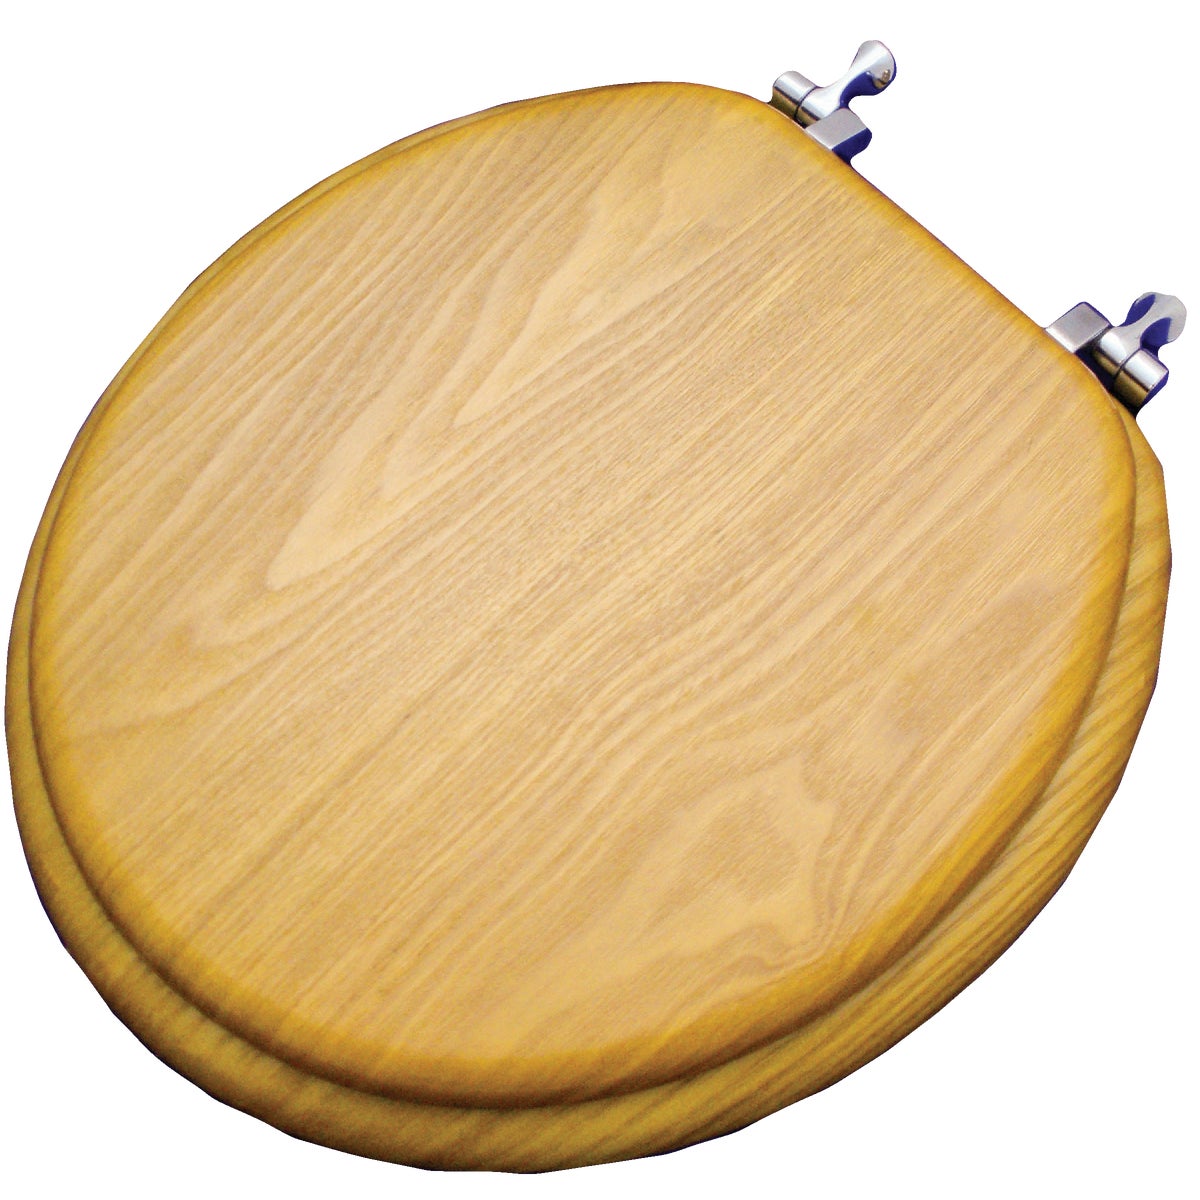 Home Impressions Round Closed Front Oak Veneer Toilet Seat